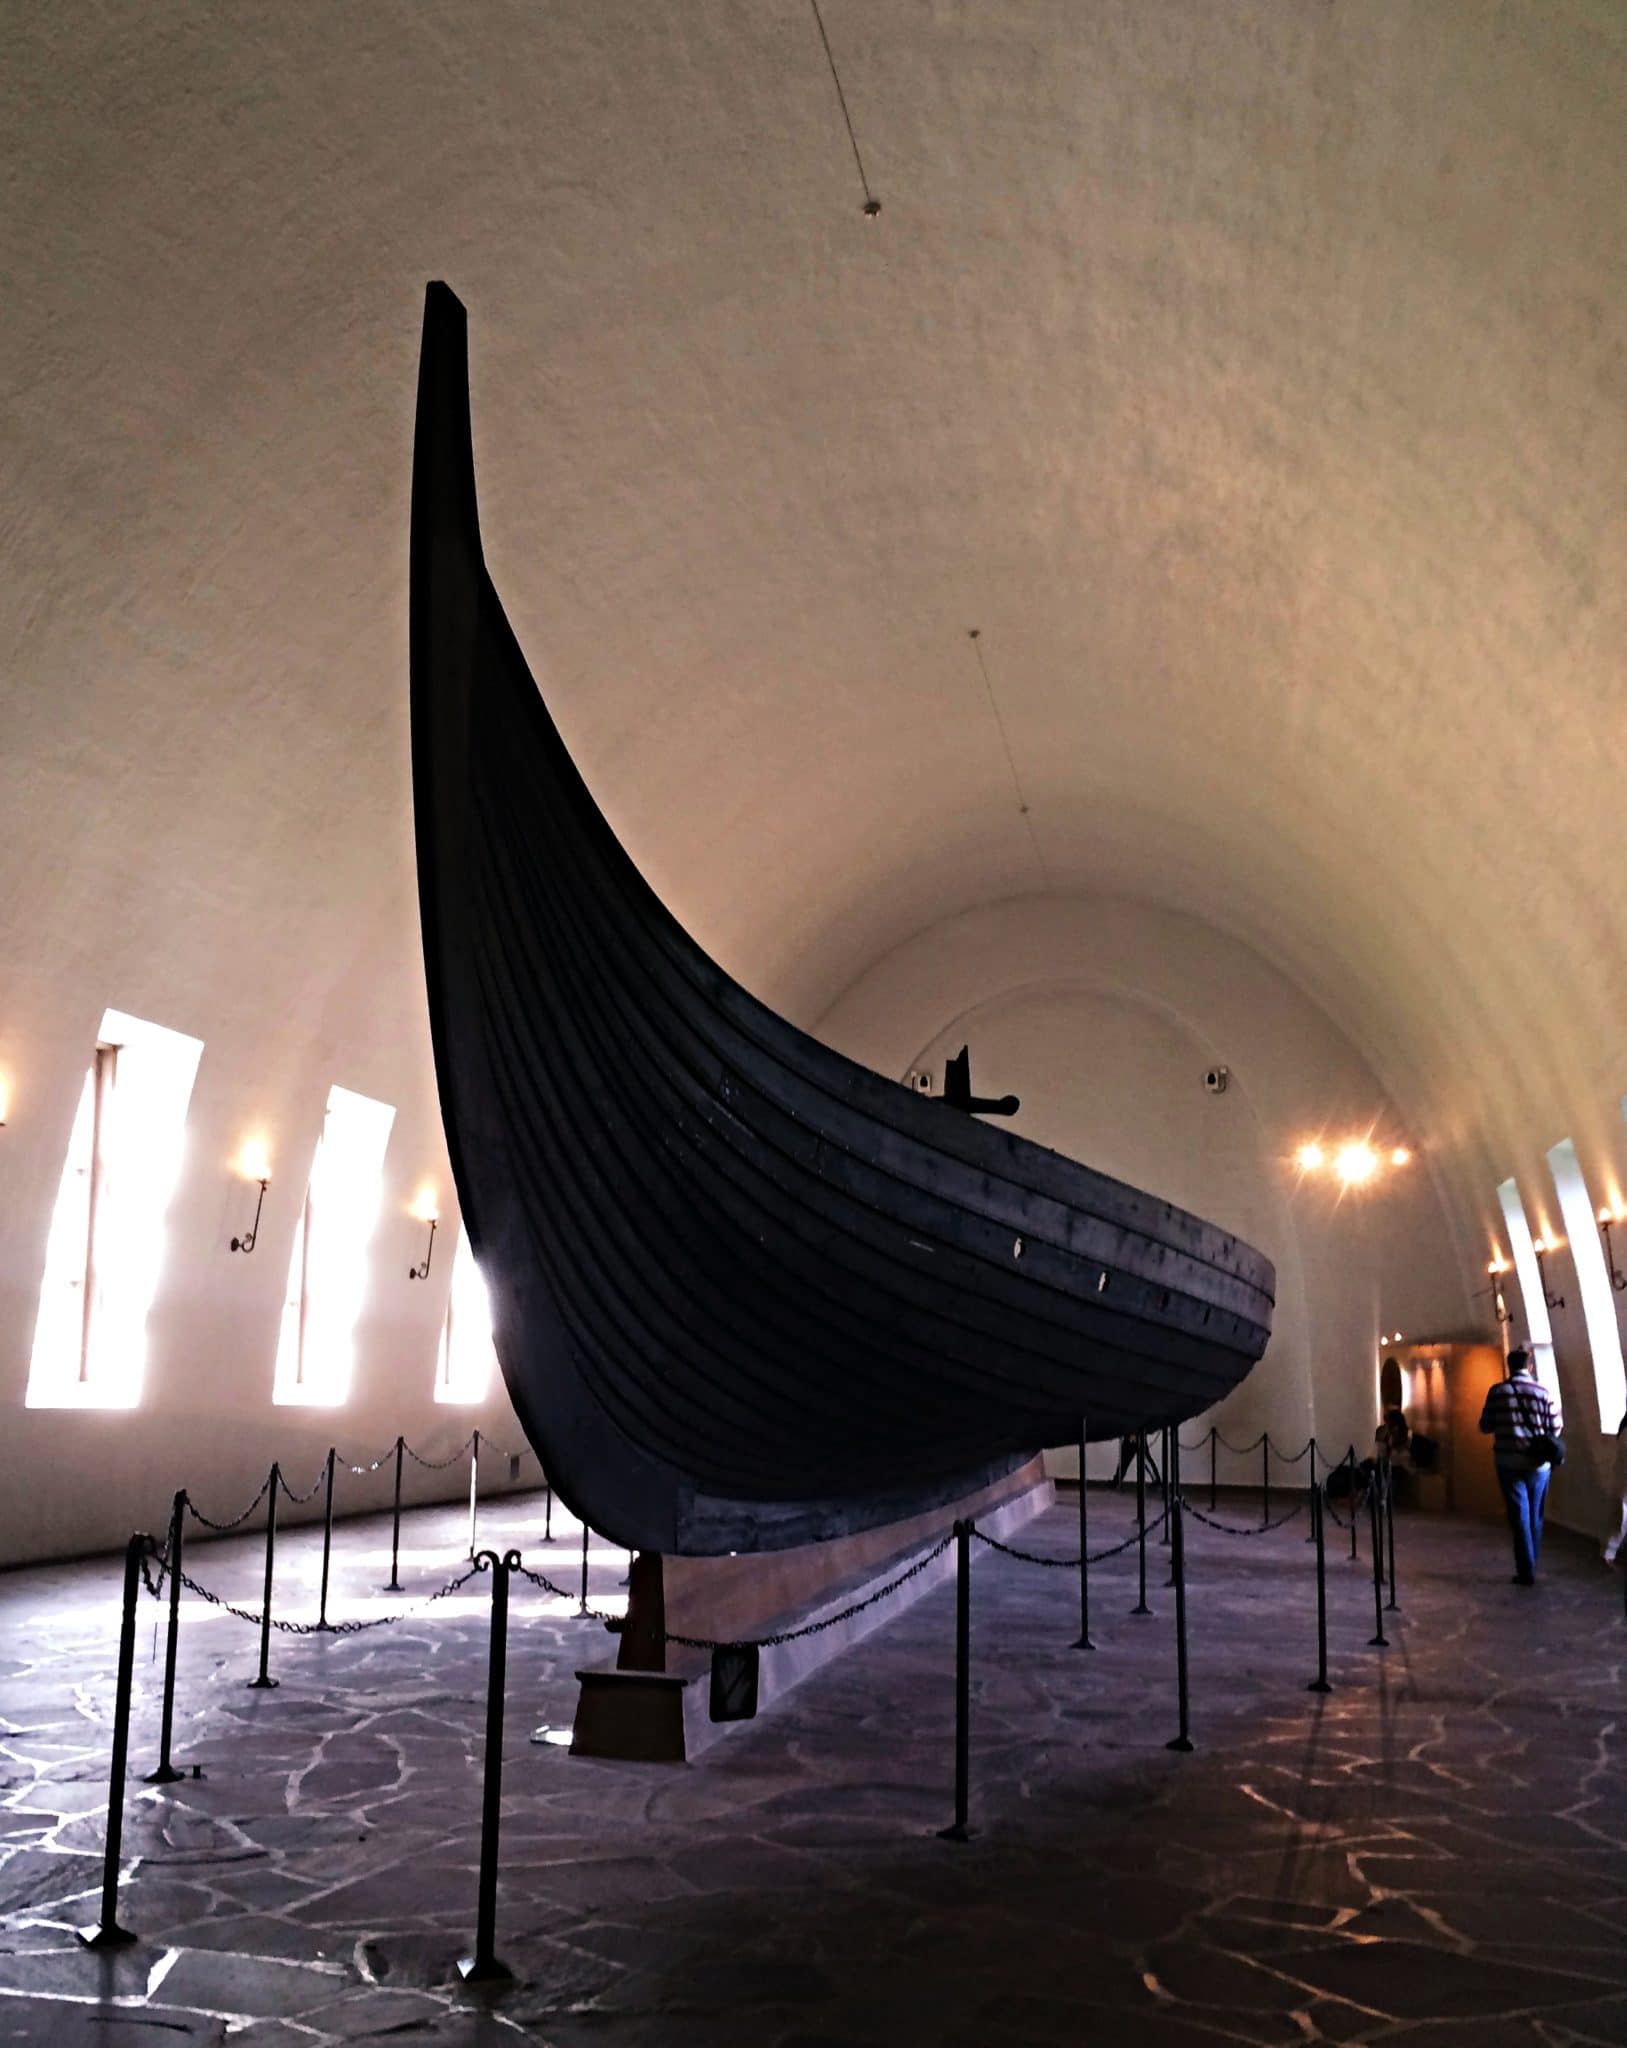 A Guide to the Viking Ship Museum in Oslo